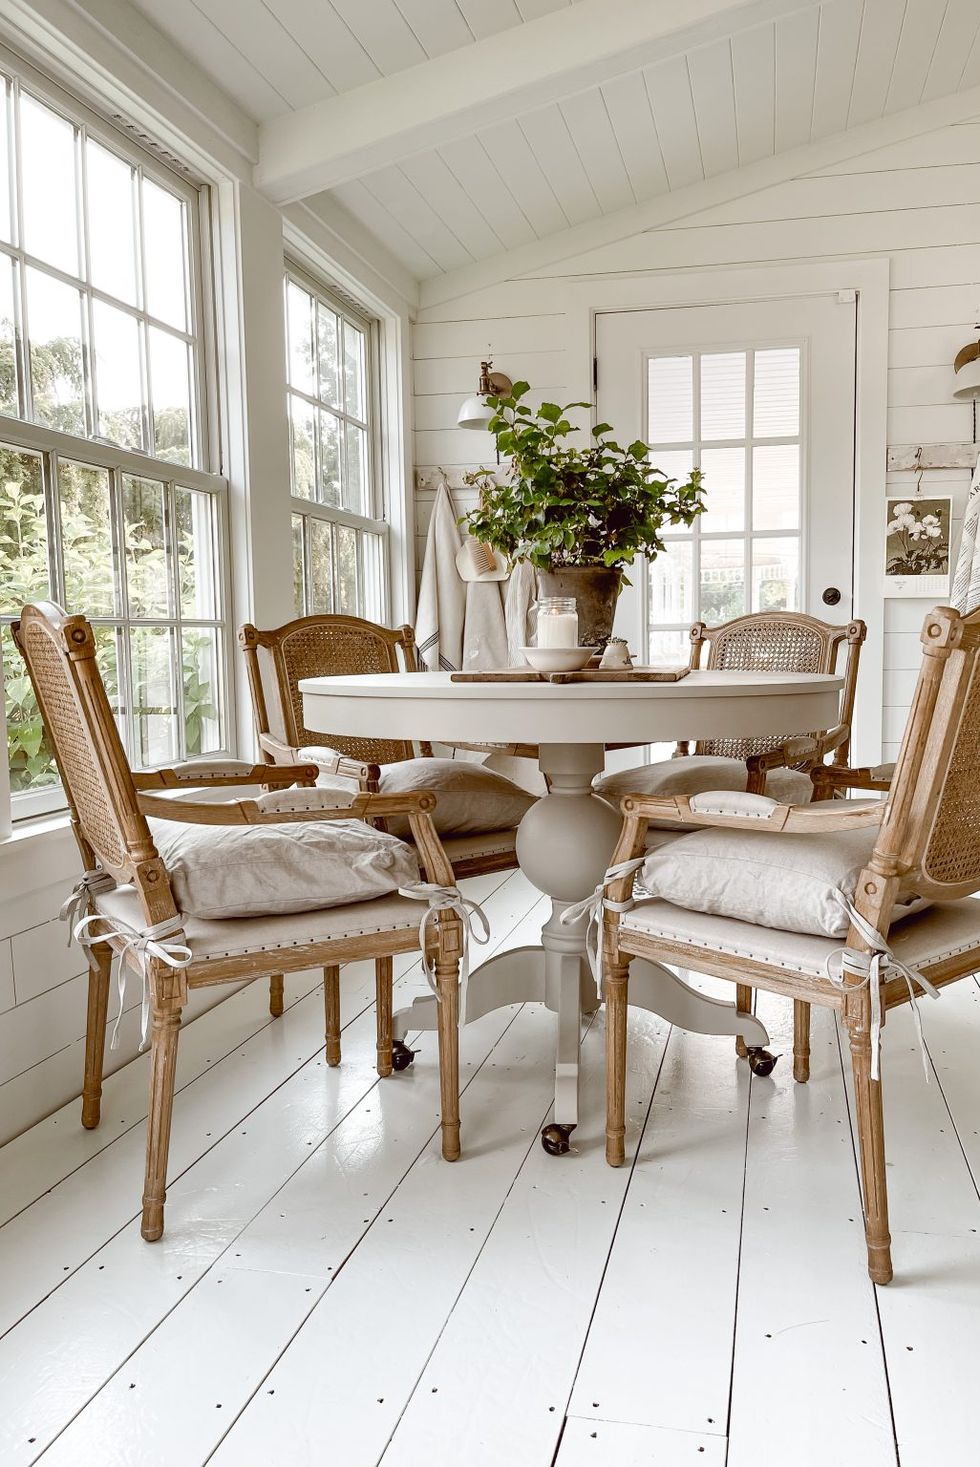 sunroom ideas with a white wooden floor